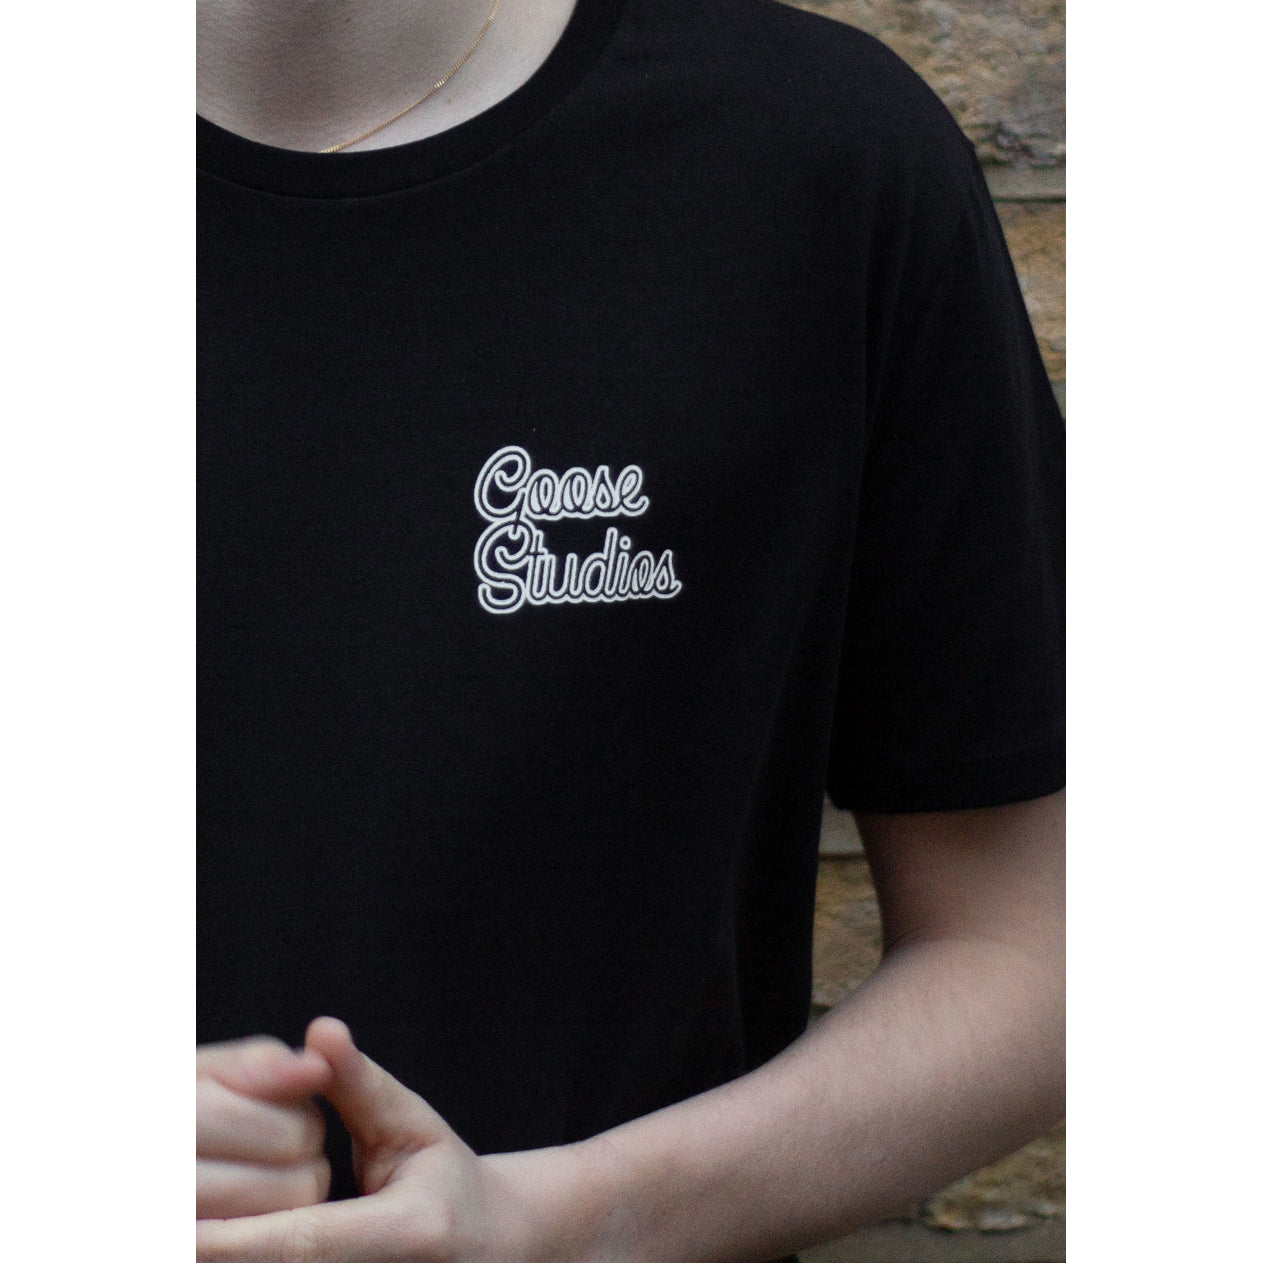 Close up of man wearing black short sleeve organic cotton t-shirt with white Goose Studios logo on left chest